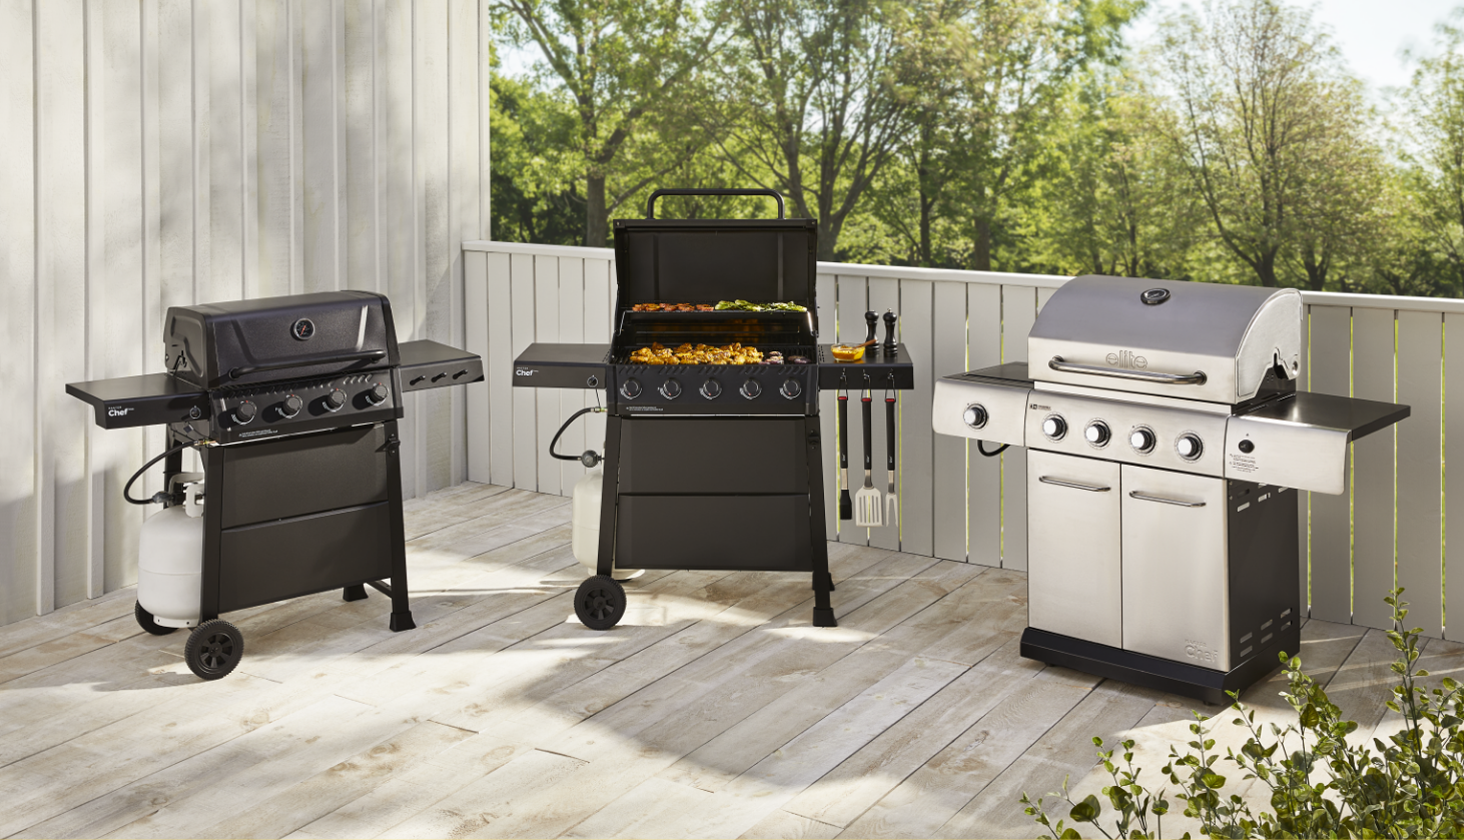 Three MASTER Chef propane BBQs side by side on a patio